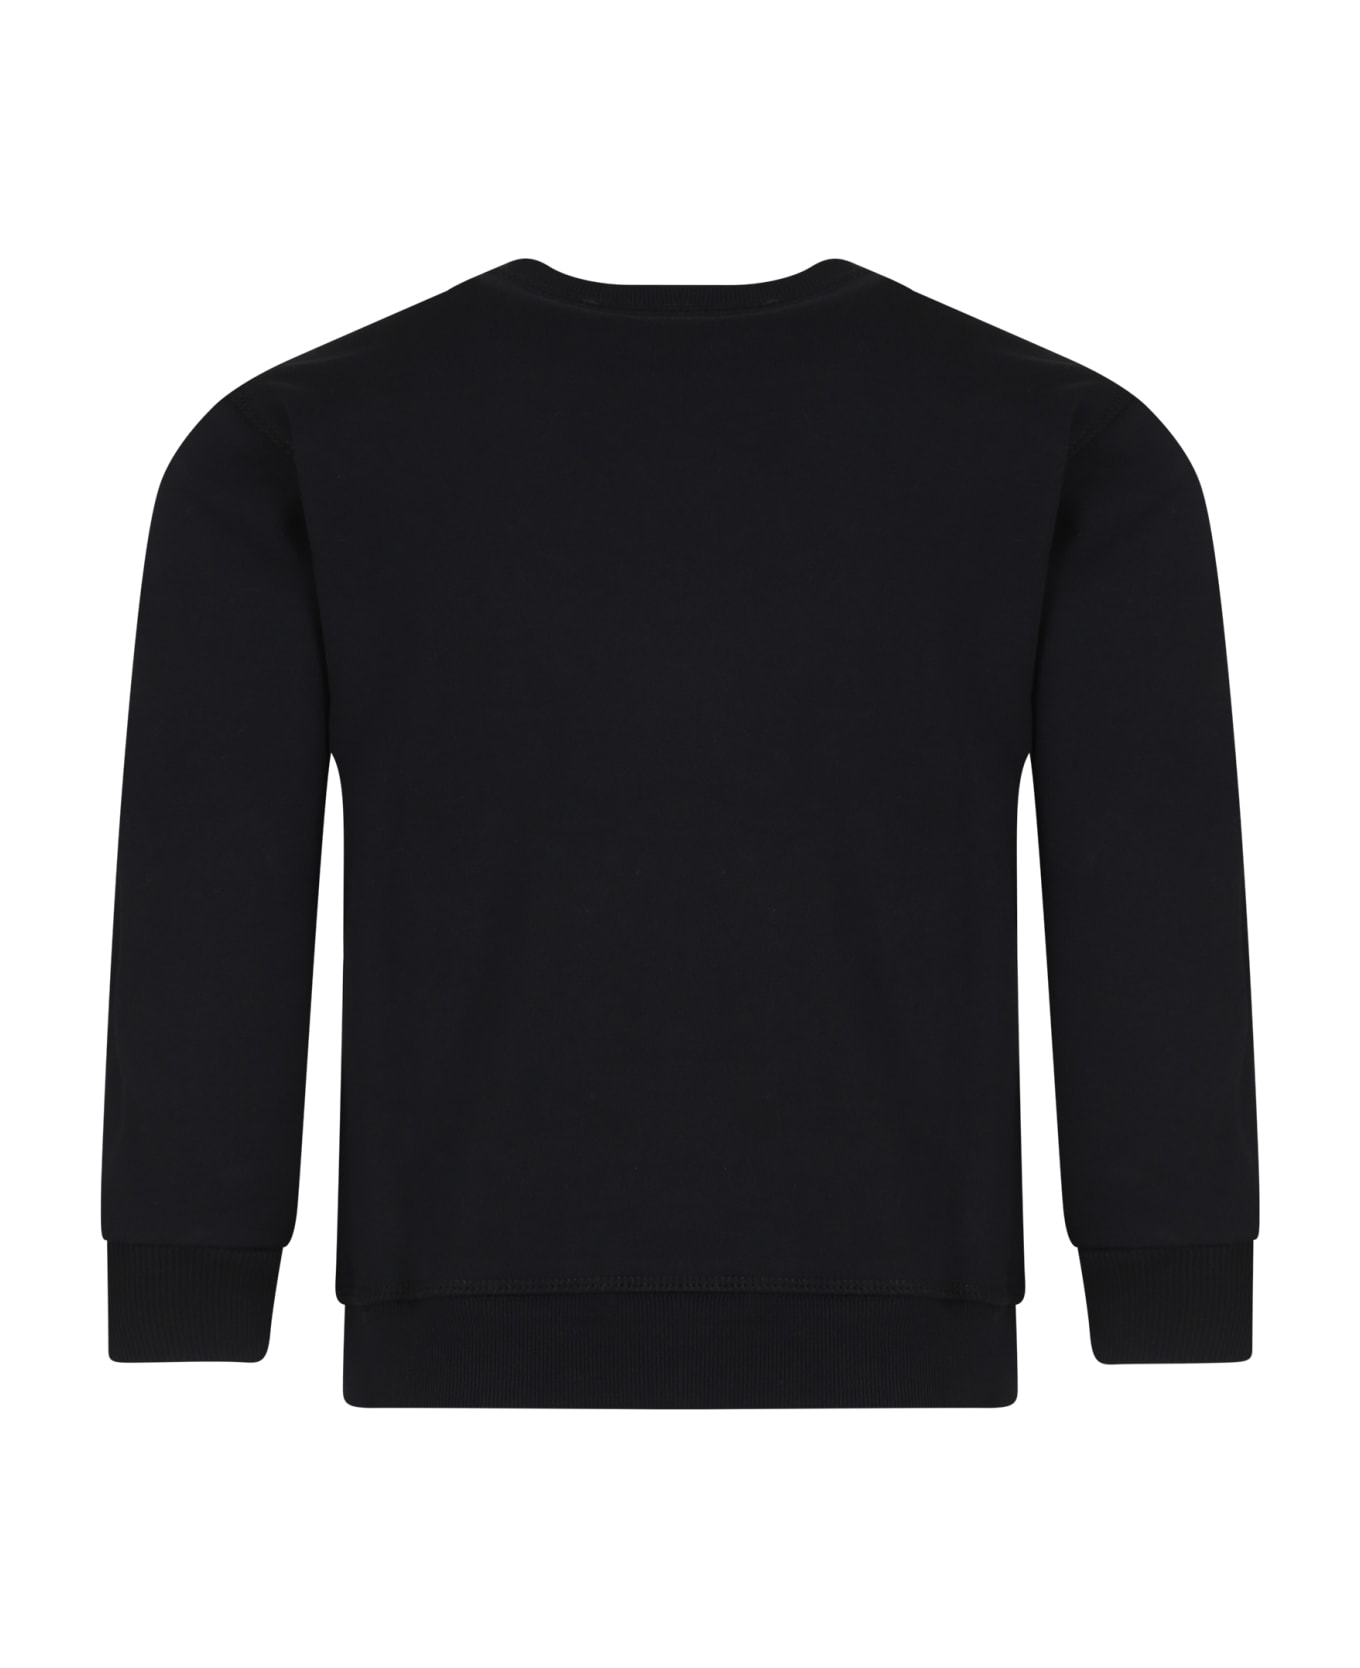 Dsquared2 Black Sweatshirt For Boy With Logo And Print - Black